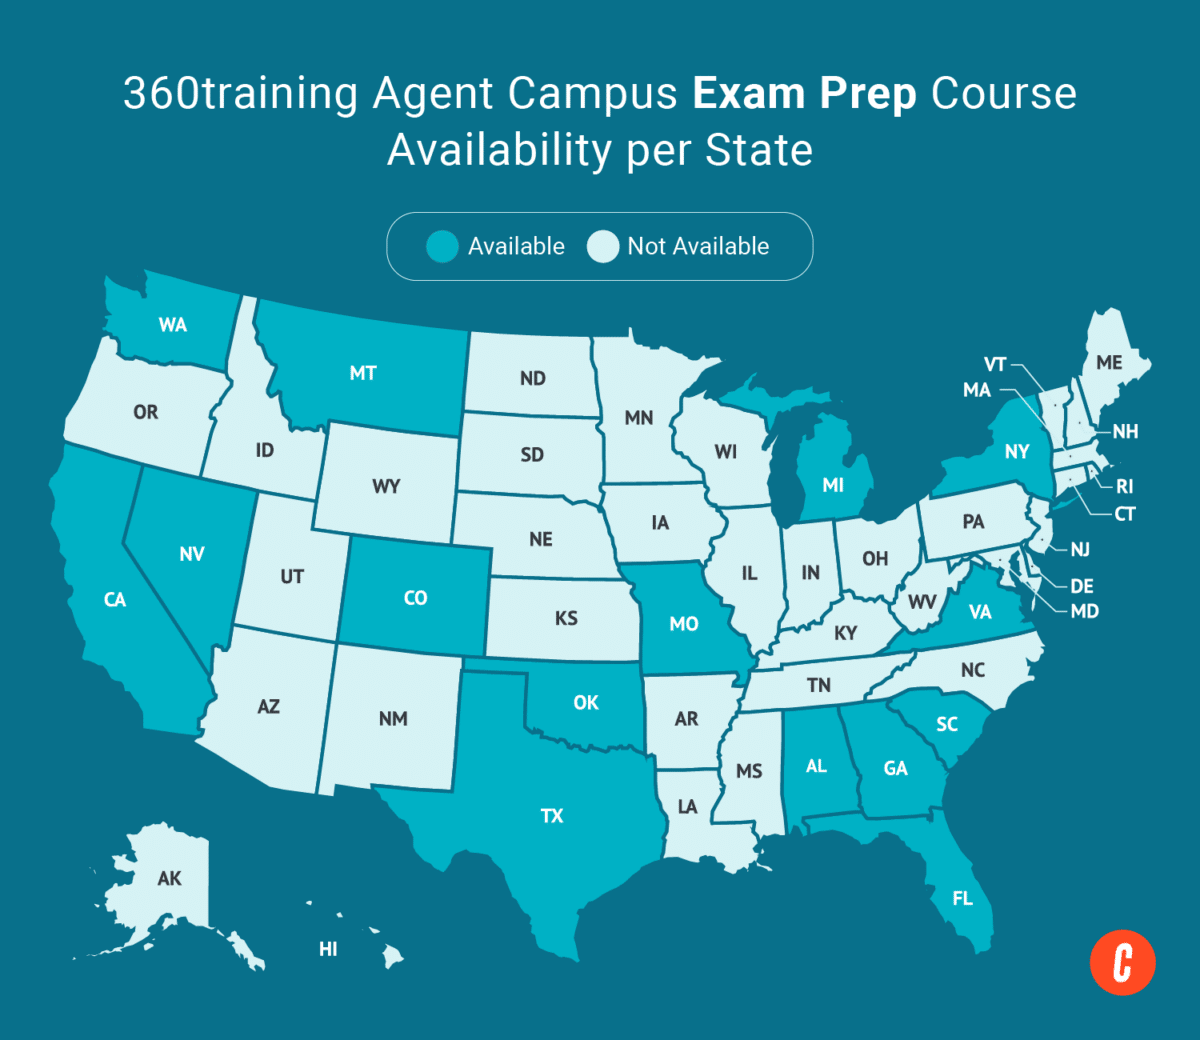 A U.S. map with states where 360training's available exam prep courses are shaded